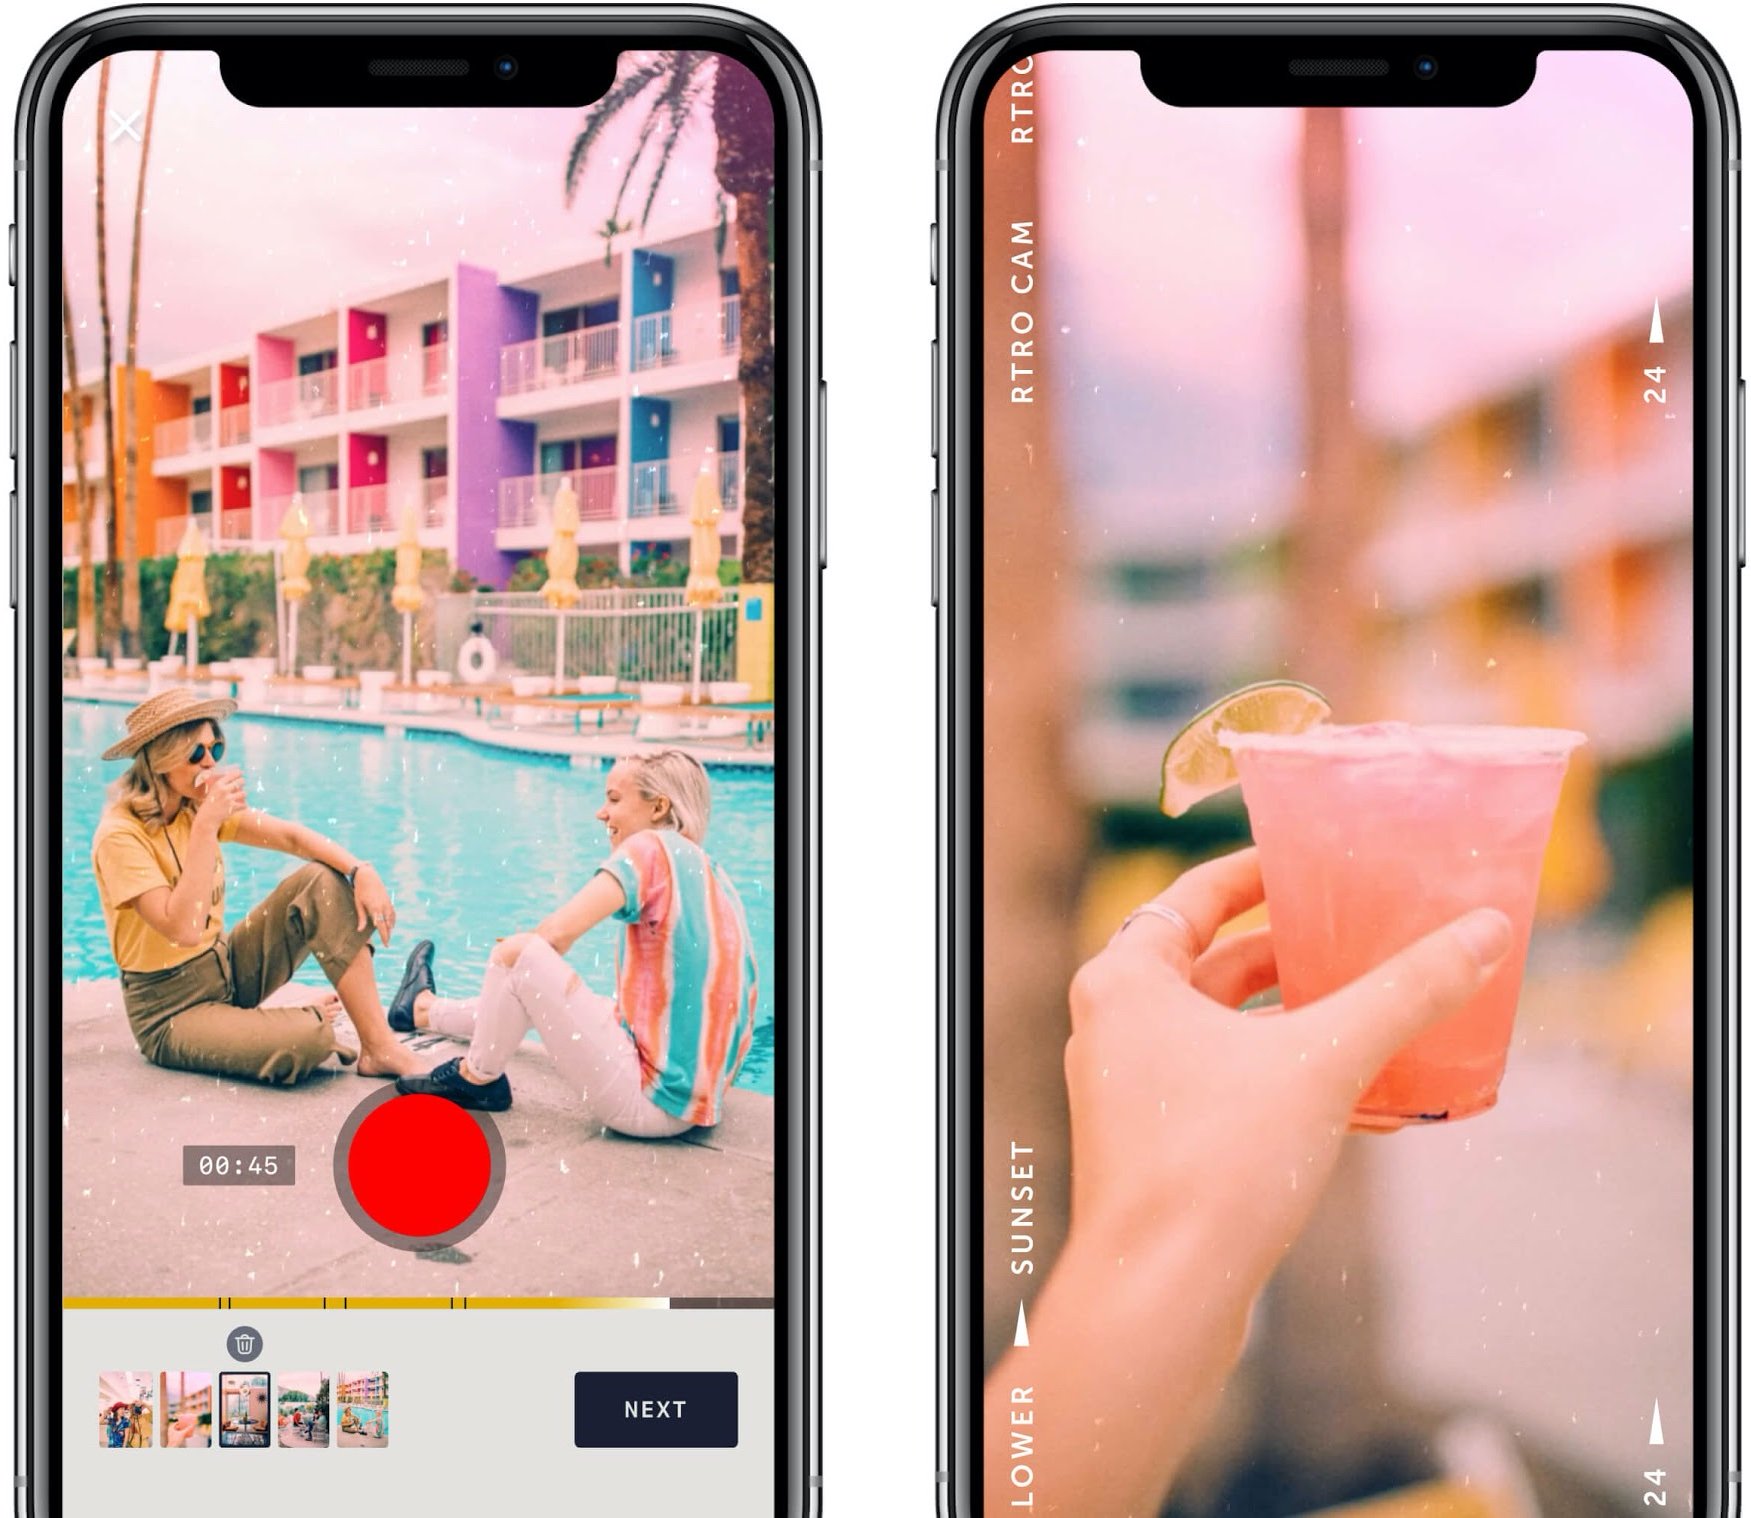 RTRO Camera is a New Video Editing App From the Makers of Moment Lenses